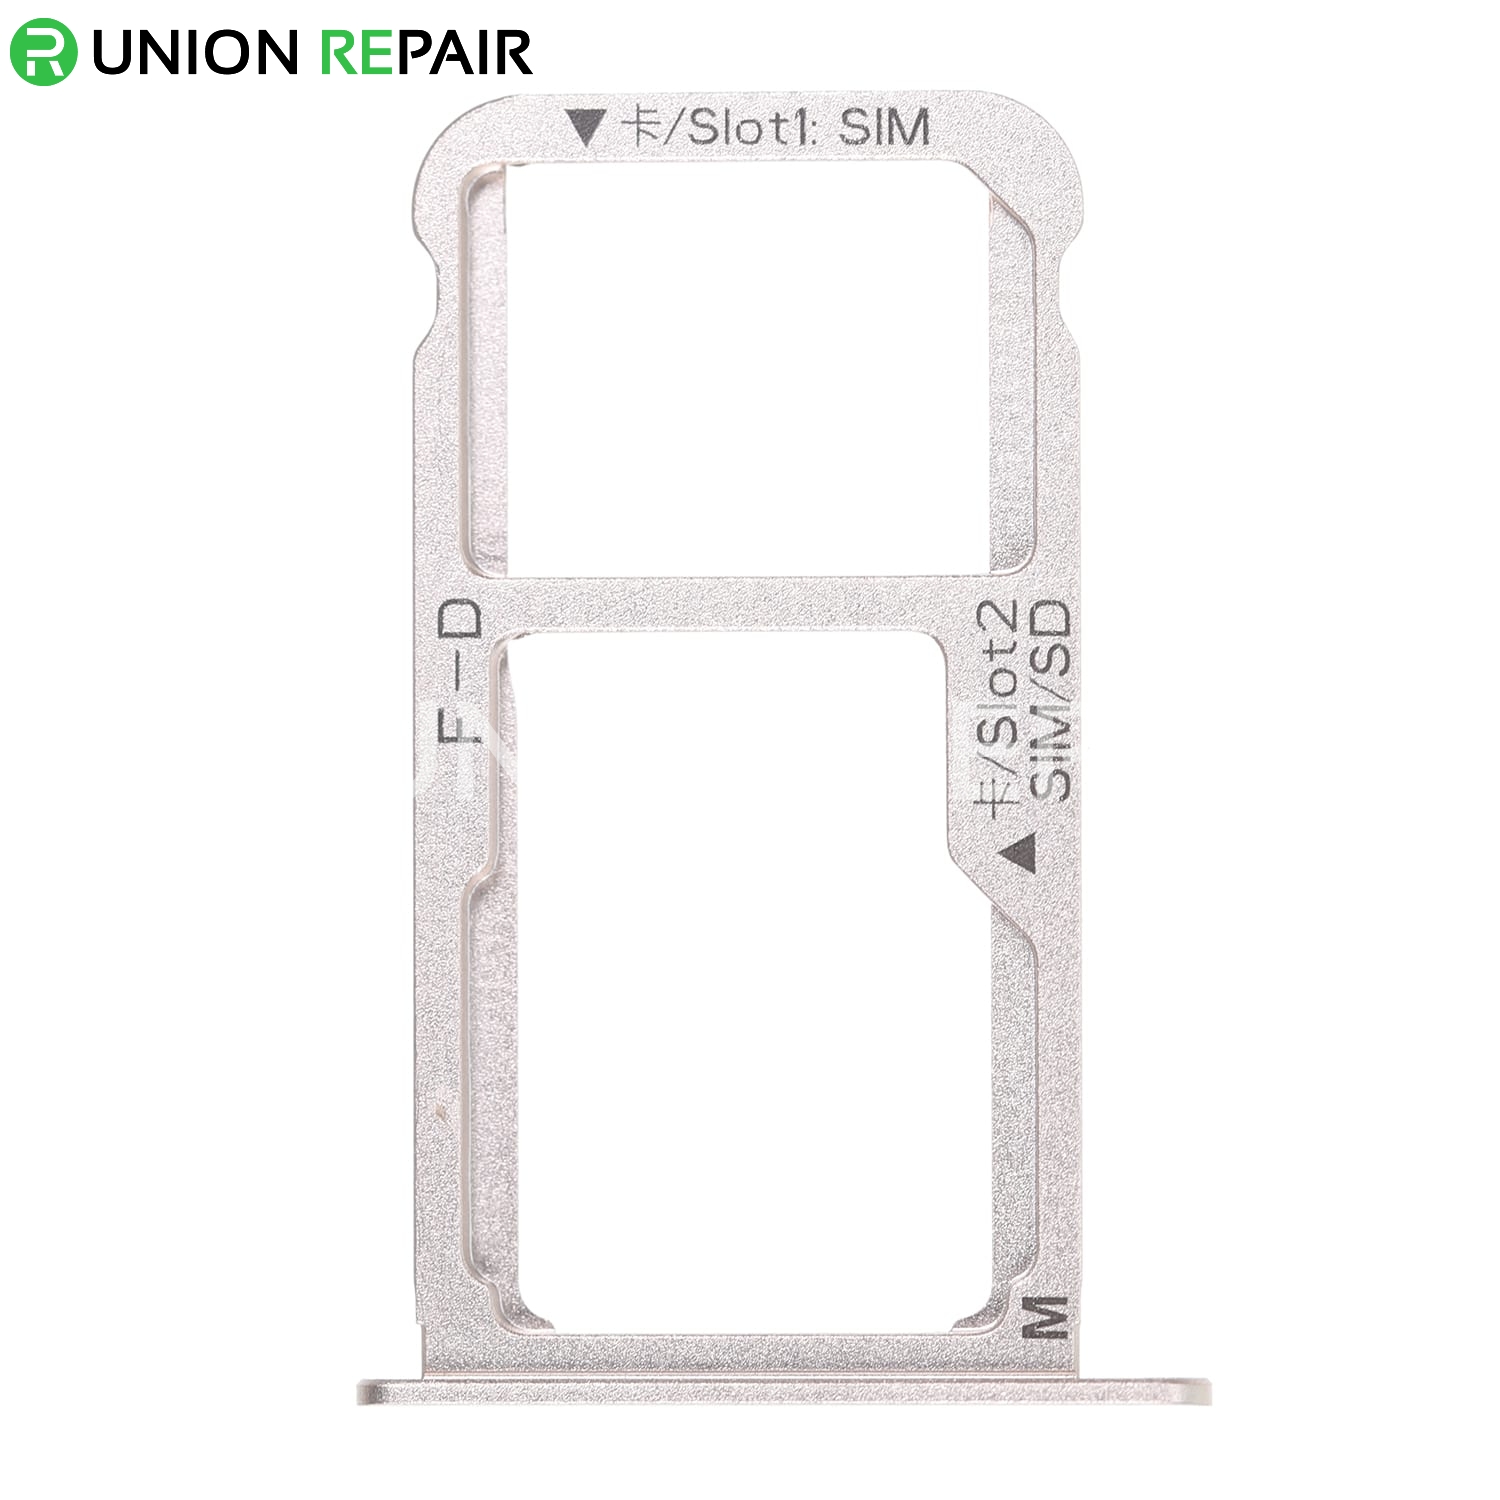 Replacement for Huawei Mate 9 SIM Card Tray - Gold